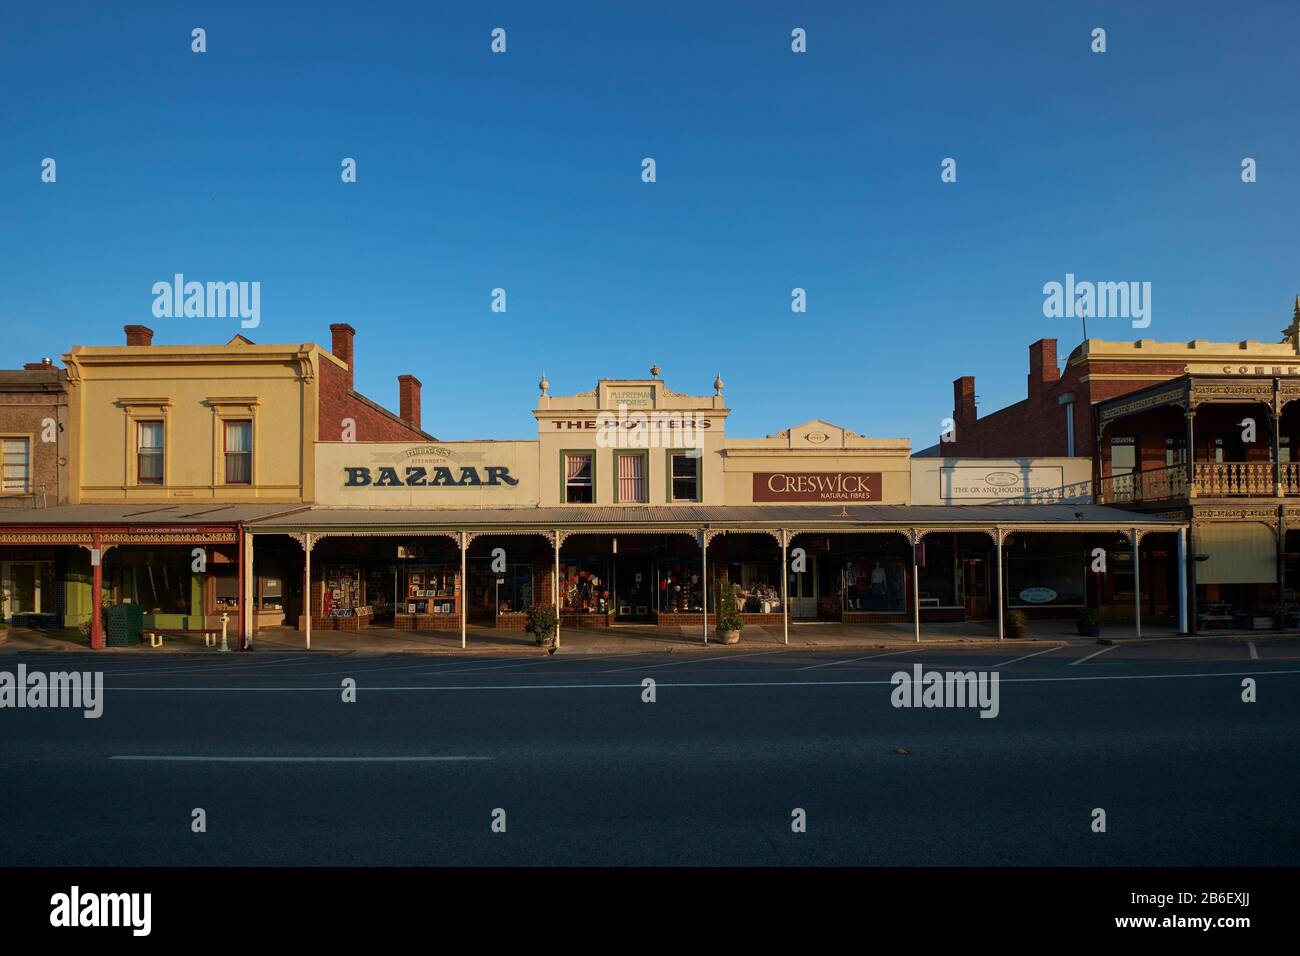 One of the main, commercial streets with Olde Time looking storefronts. In Beechworth, Victoria, Australia. Stock Photo